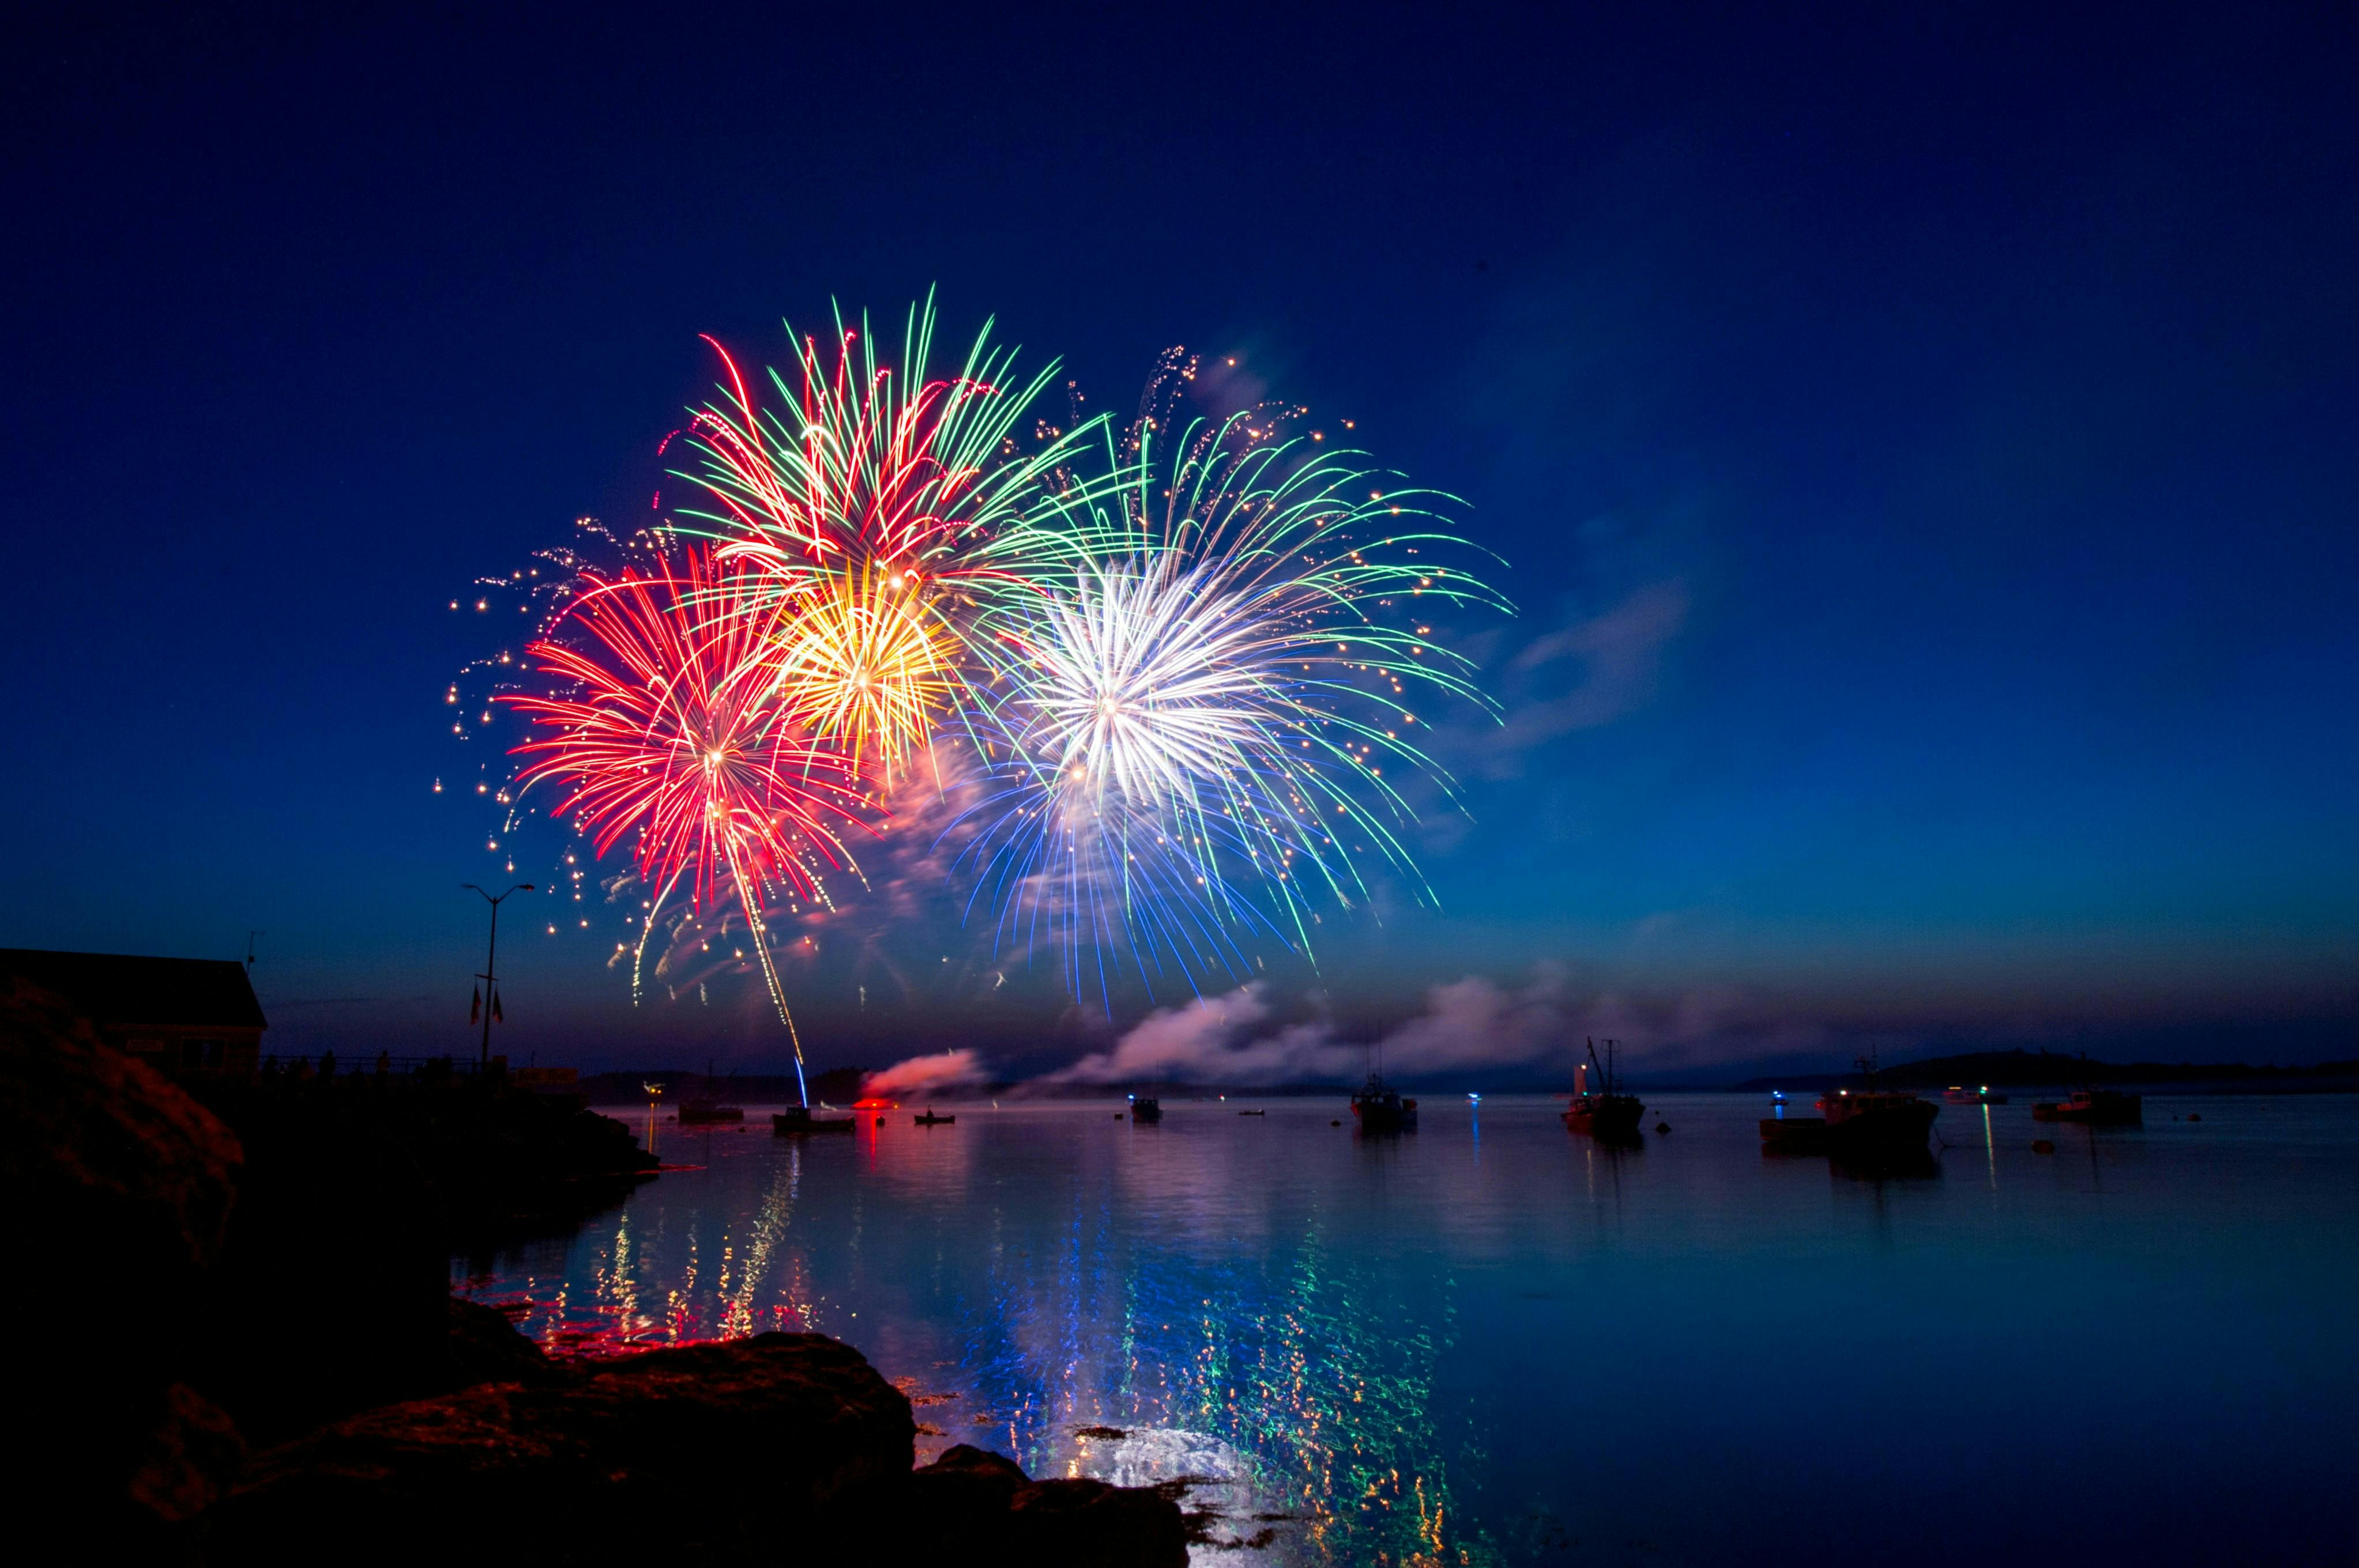 Fireworks over water with boats.